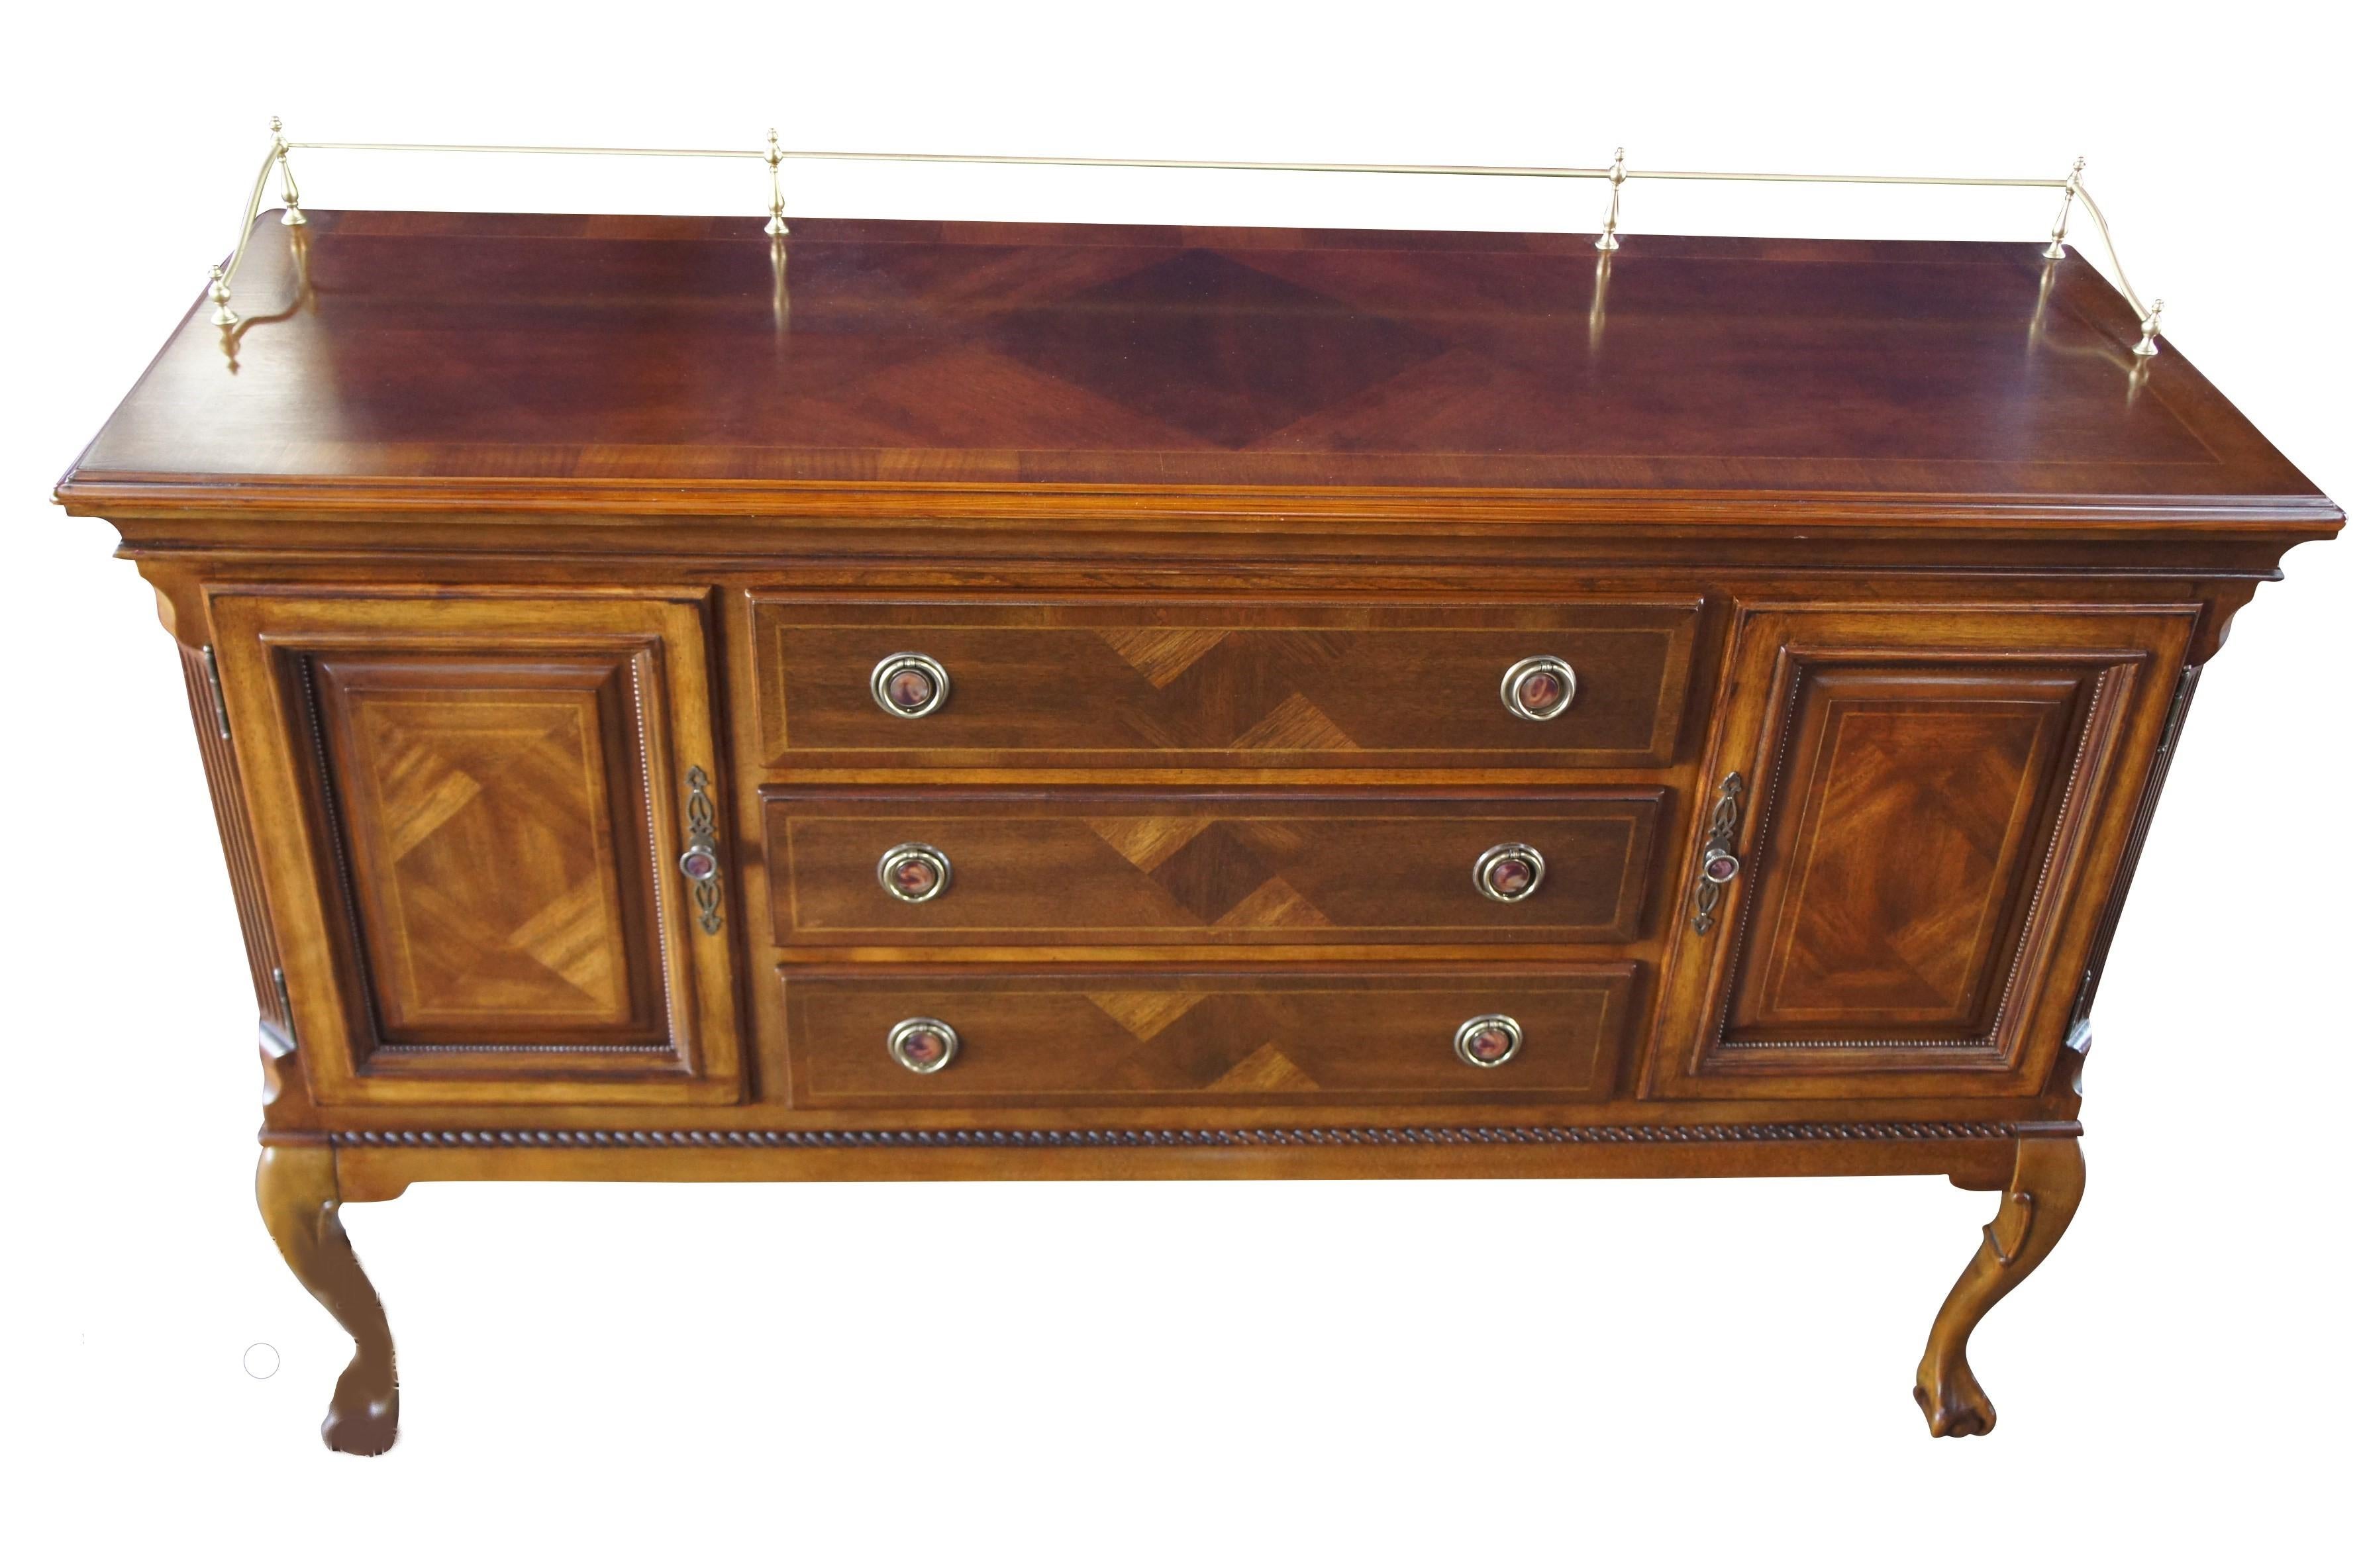 Alexander Julian home colors Chippendale sideboard buffet server ball and claw

Up for consideration is a gorgeous Chippendale style sideboard. This piece is made by Universal Furniture out of High Point, NC for Alexander Julian. Part of the Home